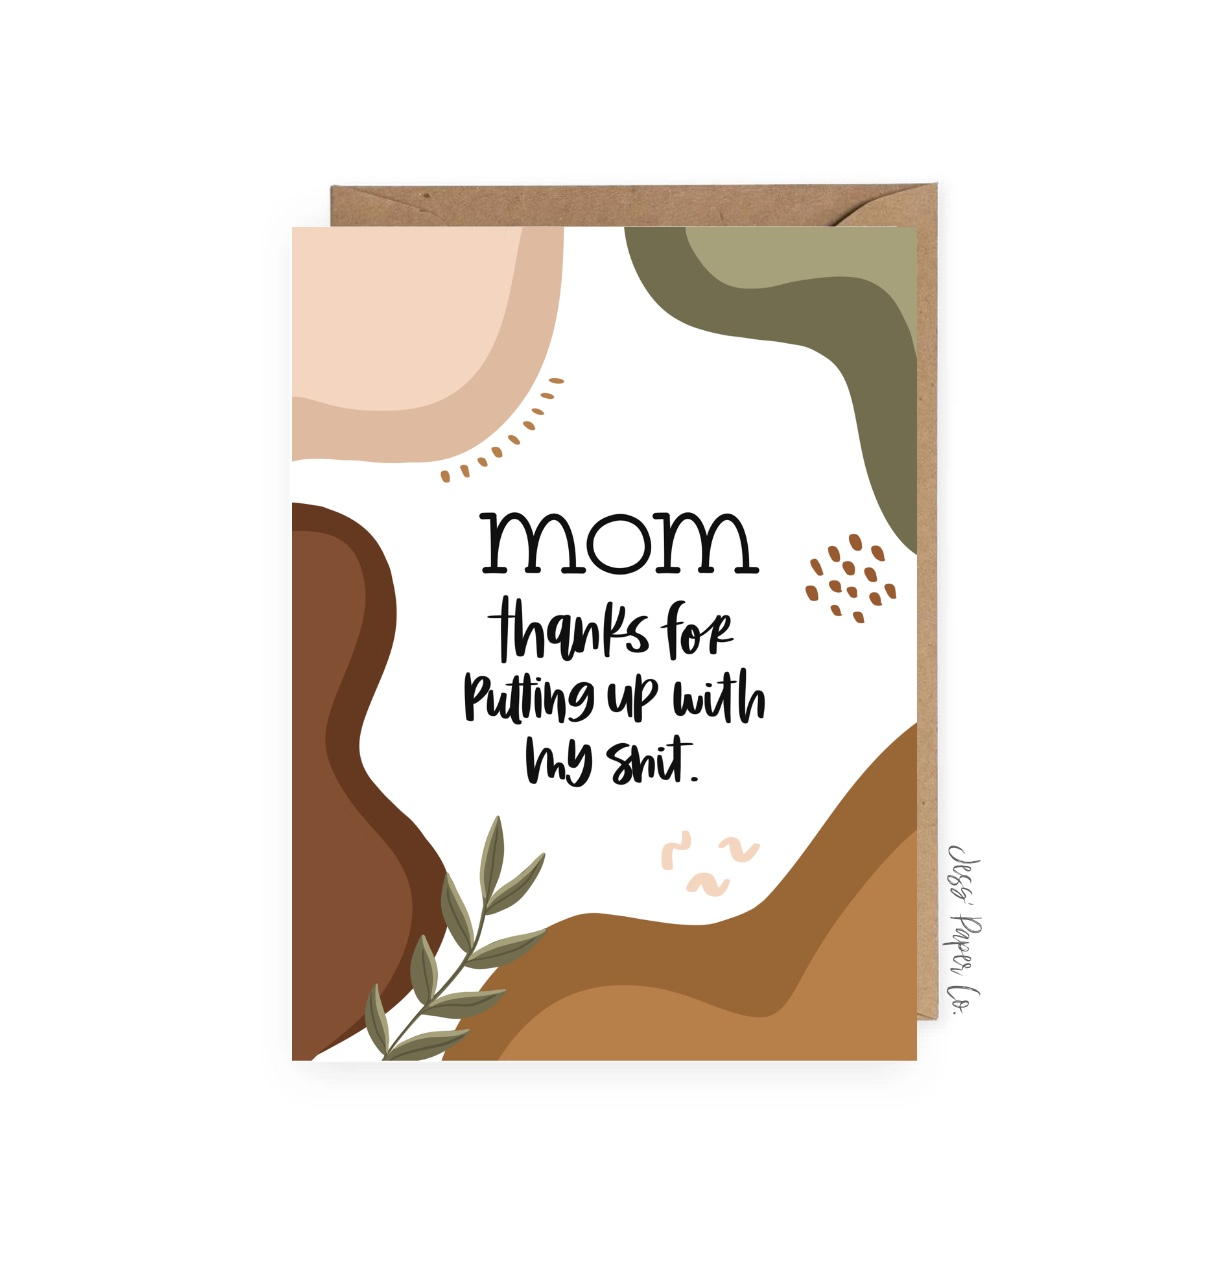 Jess's Paper Co: Greeting Card - "Thanks For Putting Up With My Sh*t" - Mothers Day